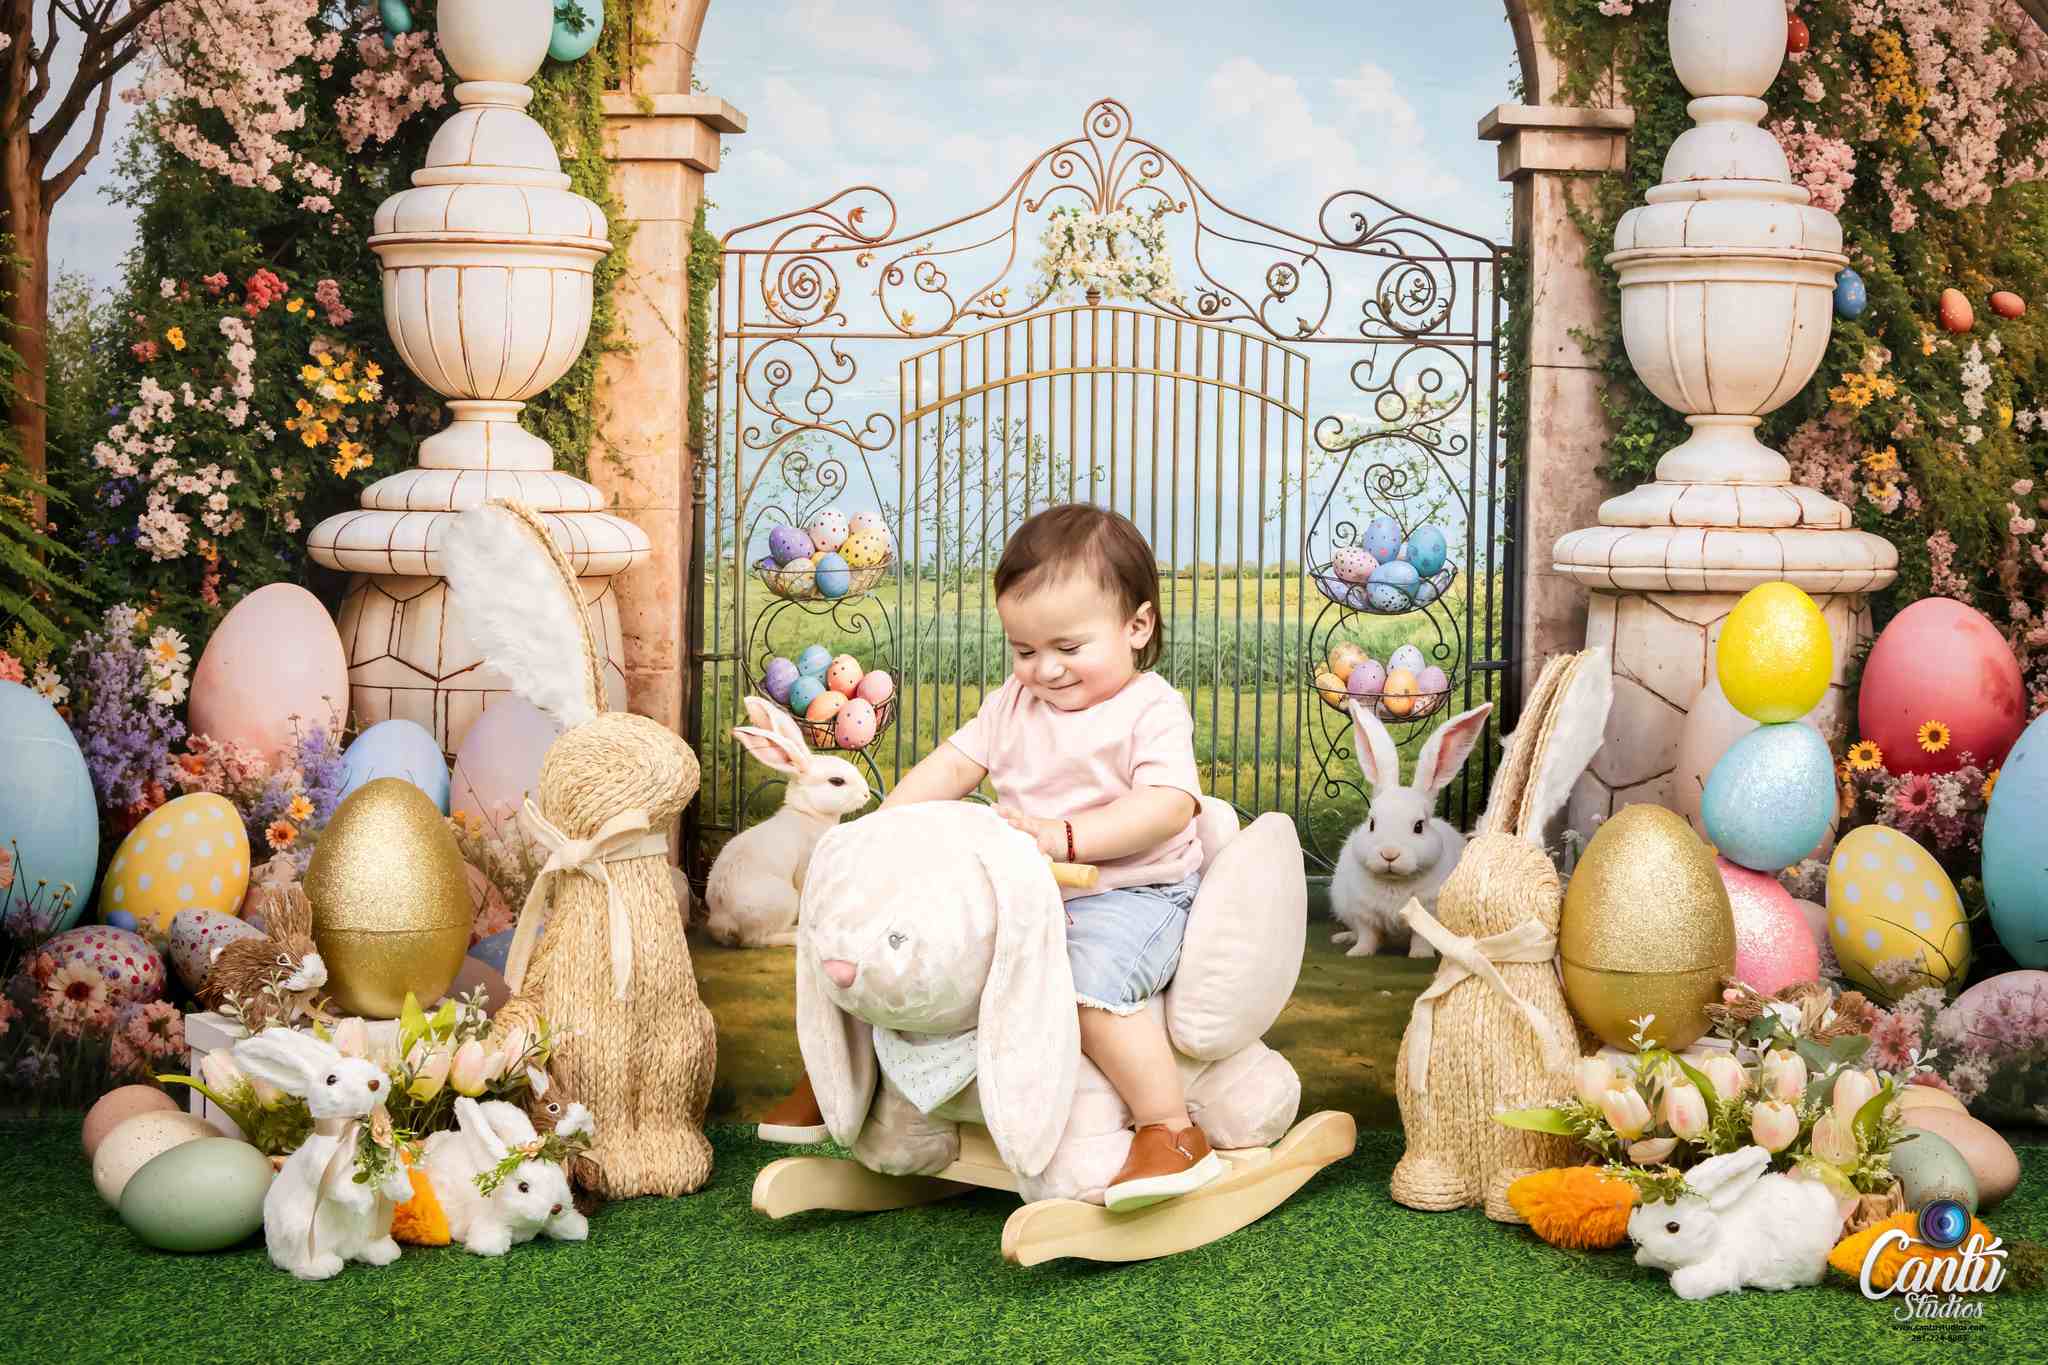 Kate Easter Backdrop Bunny Colorful Flowers Arch Designed by Chain Photography